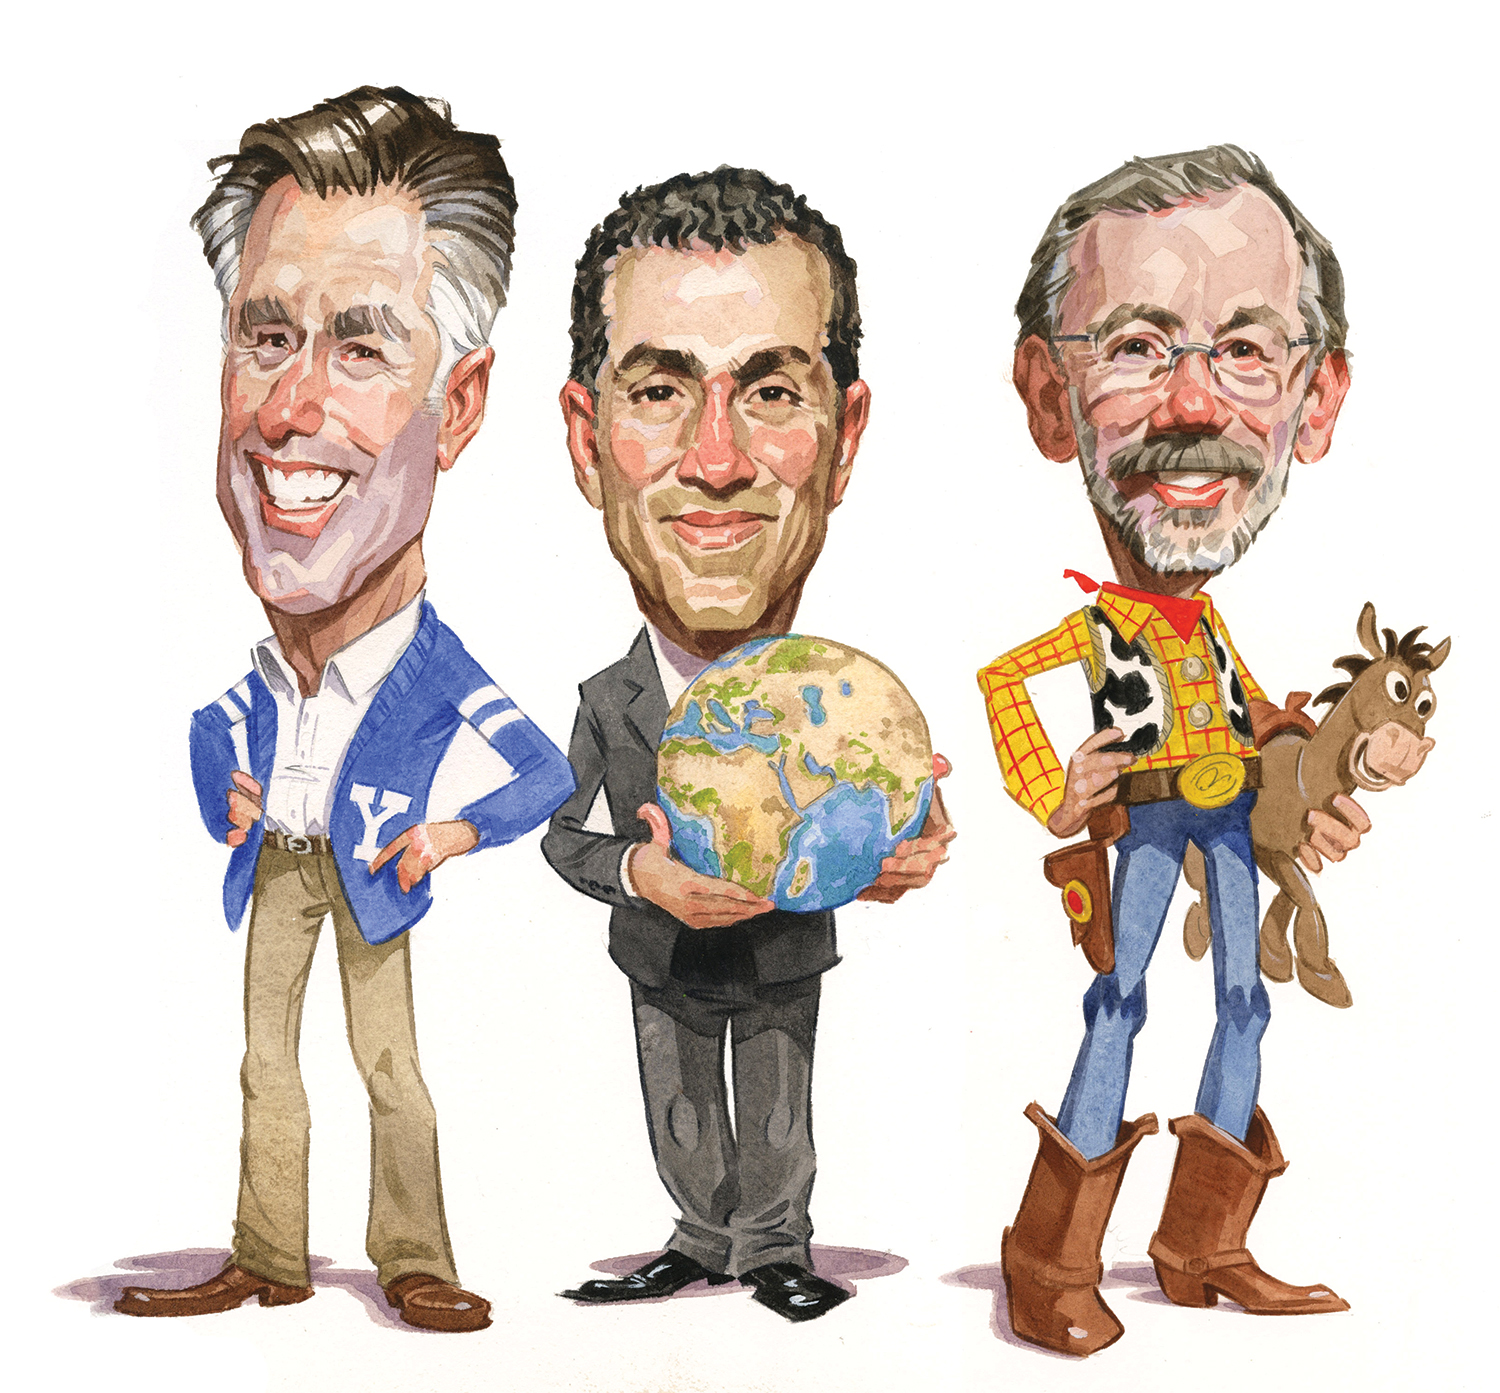 A caricature illustration of Mitt Romney, Vali Nasr, and Ed Catmull. They have large heads and small bodies. Mitt Romney is wearing a BYU cardigan with a Y on it. Vali Nasr is holding a globe. Ed Catmull is dressed like Woody from Toy Story and holding a toy "Bullseye," the horse from Toy Story.